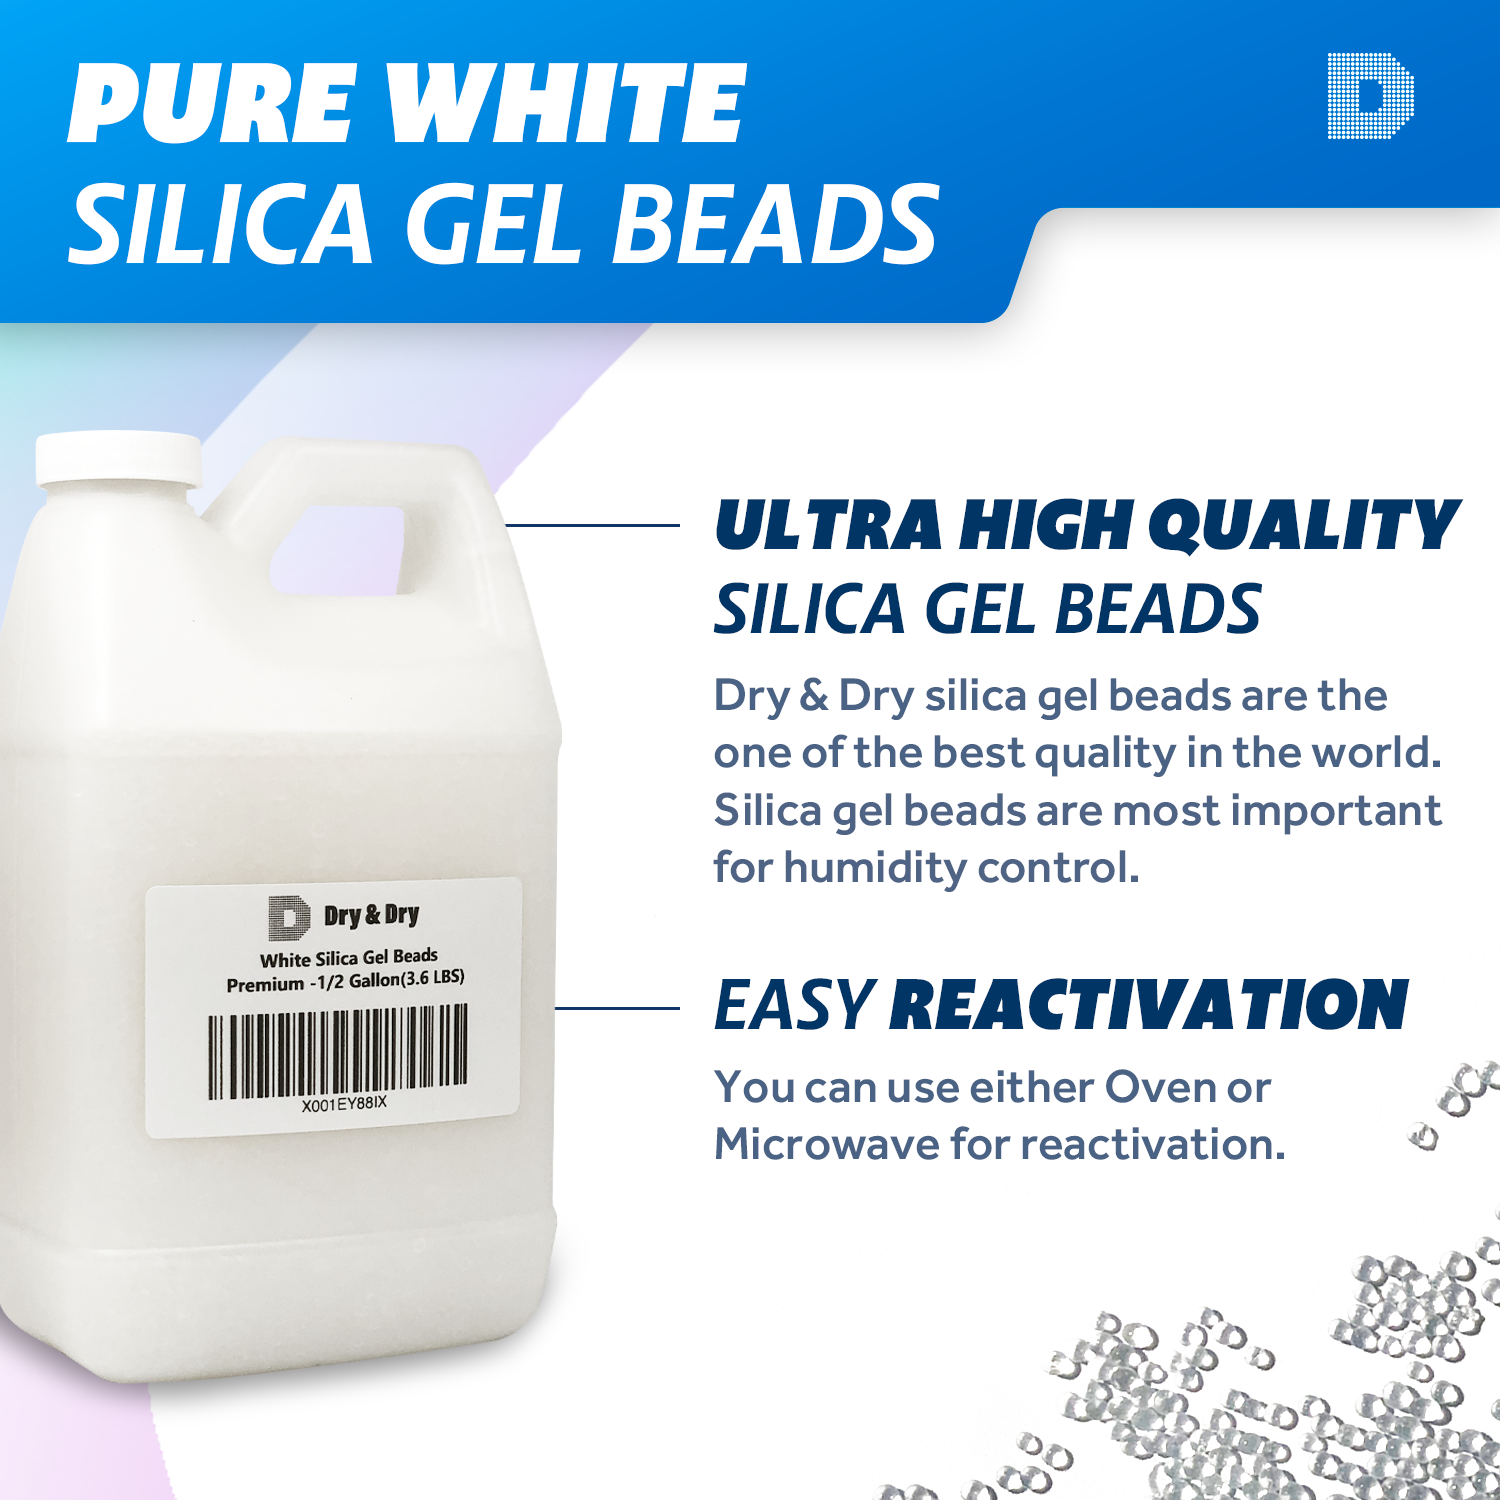 1/2 Gallon "Dry & Dry" Premium White Silica Gel Beads (Industry Standard 3-5 mm) - 3.6 LBS Reusable